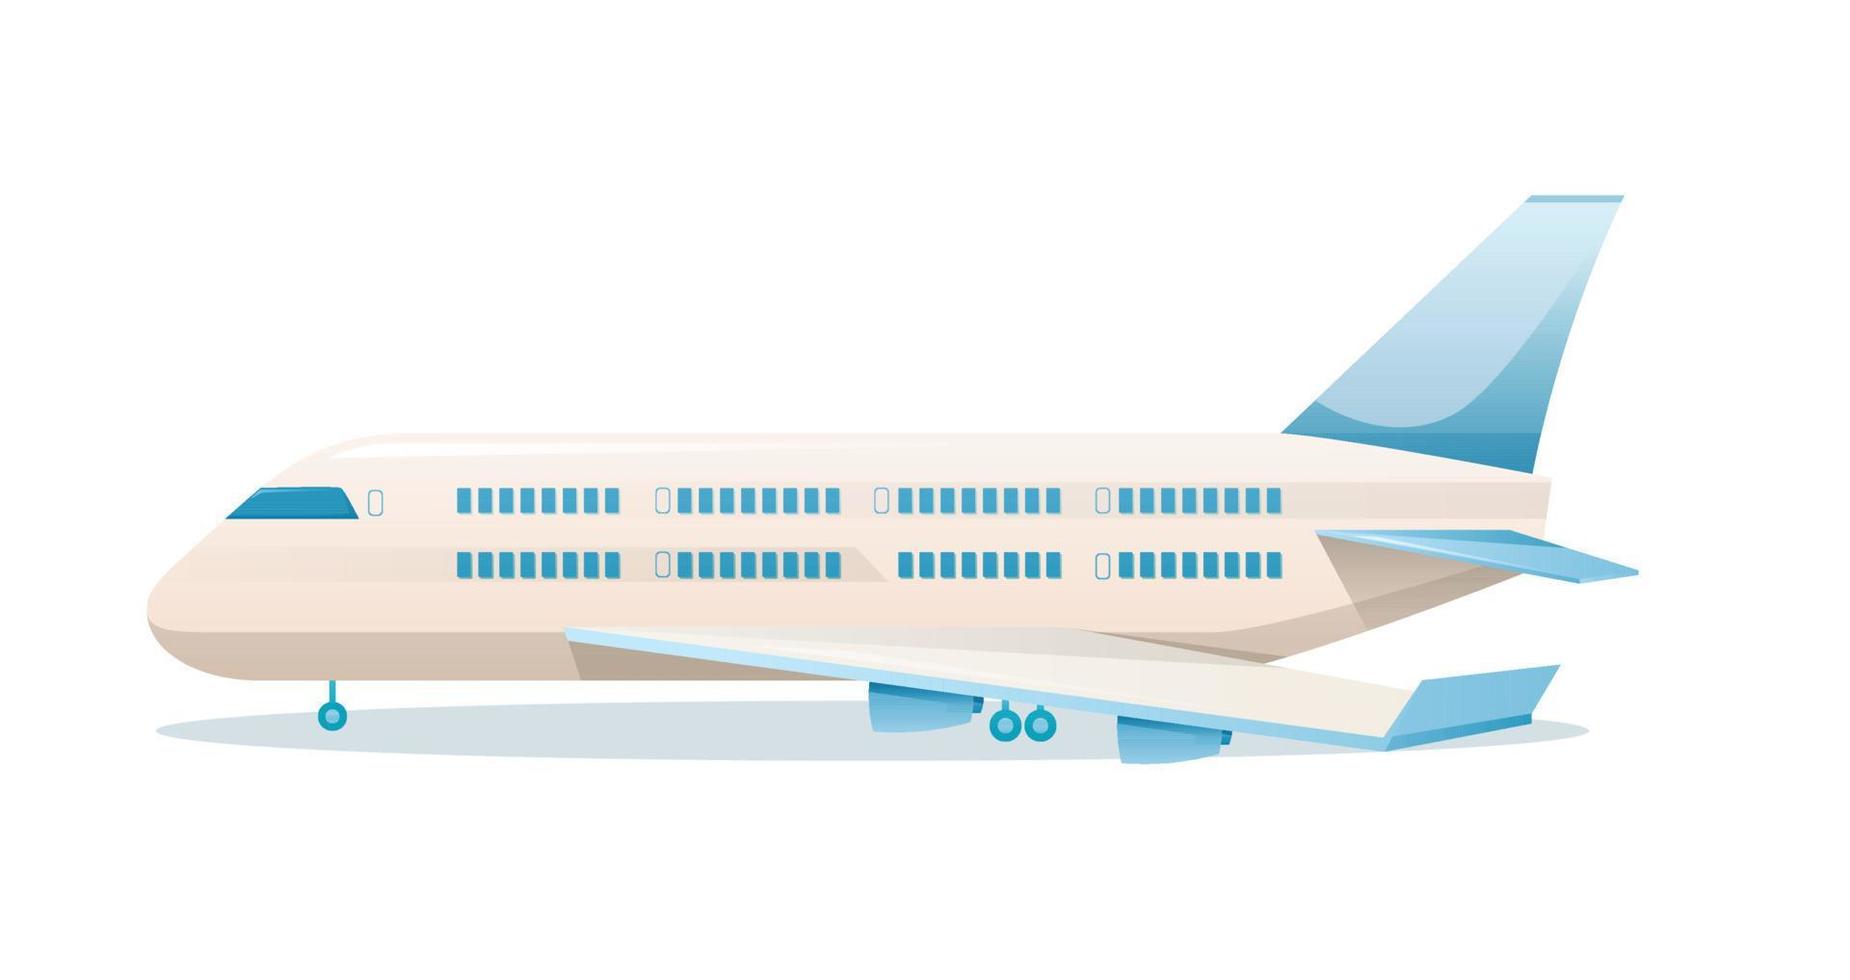 Airplane aircraft vehicle isolated vector illustration